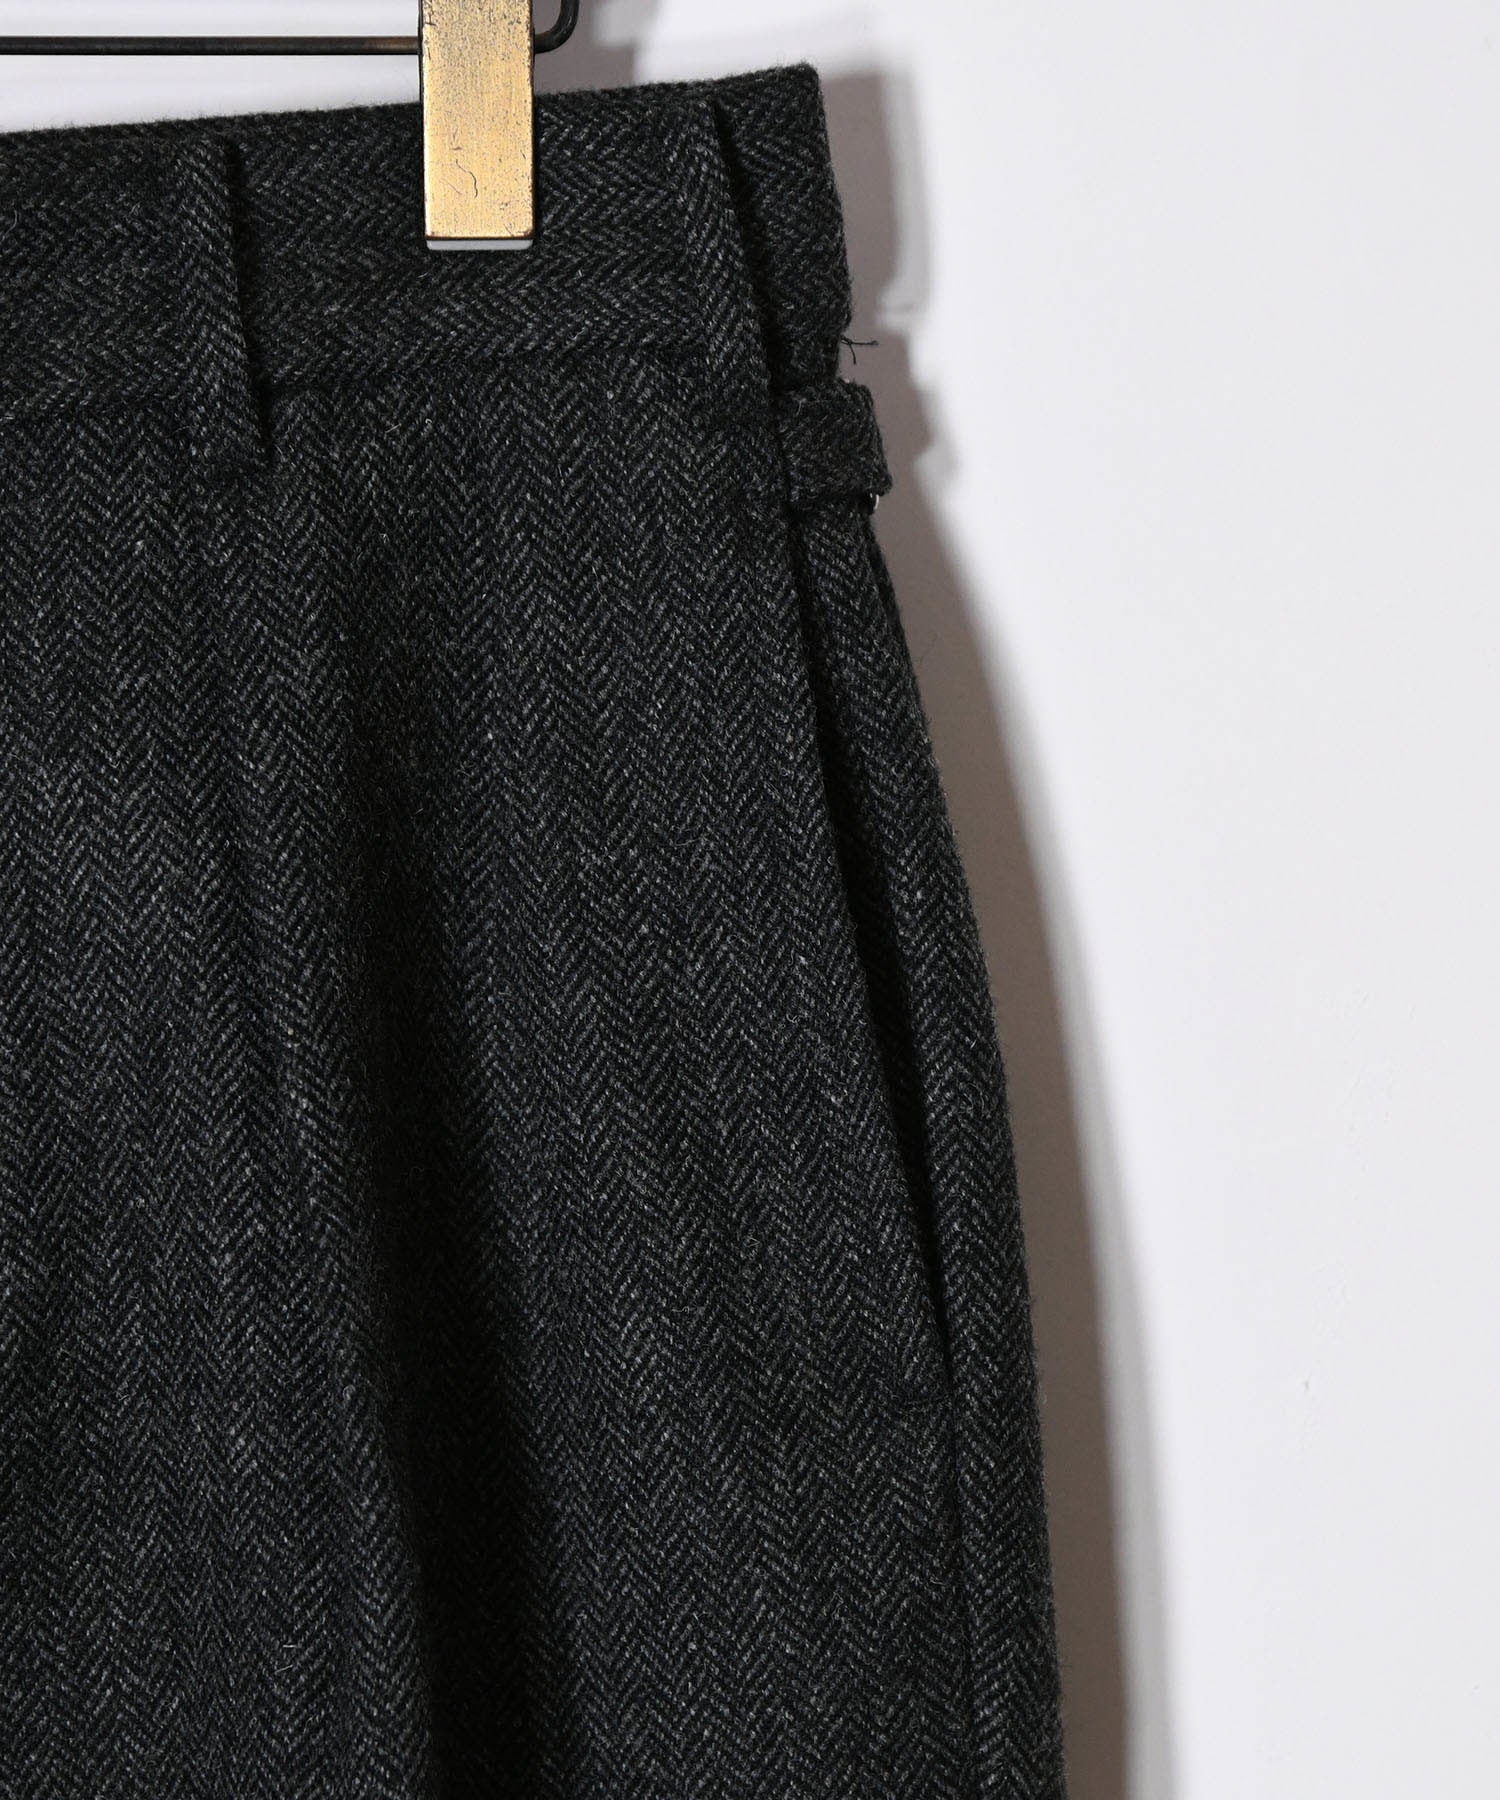 A.PRESSE】Tweed Two Tack Trousers ｜ ADAM ET ROPE' | アダムエロペ 公式サイト